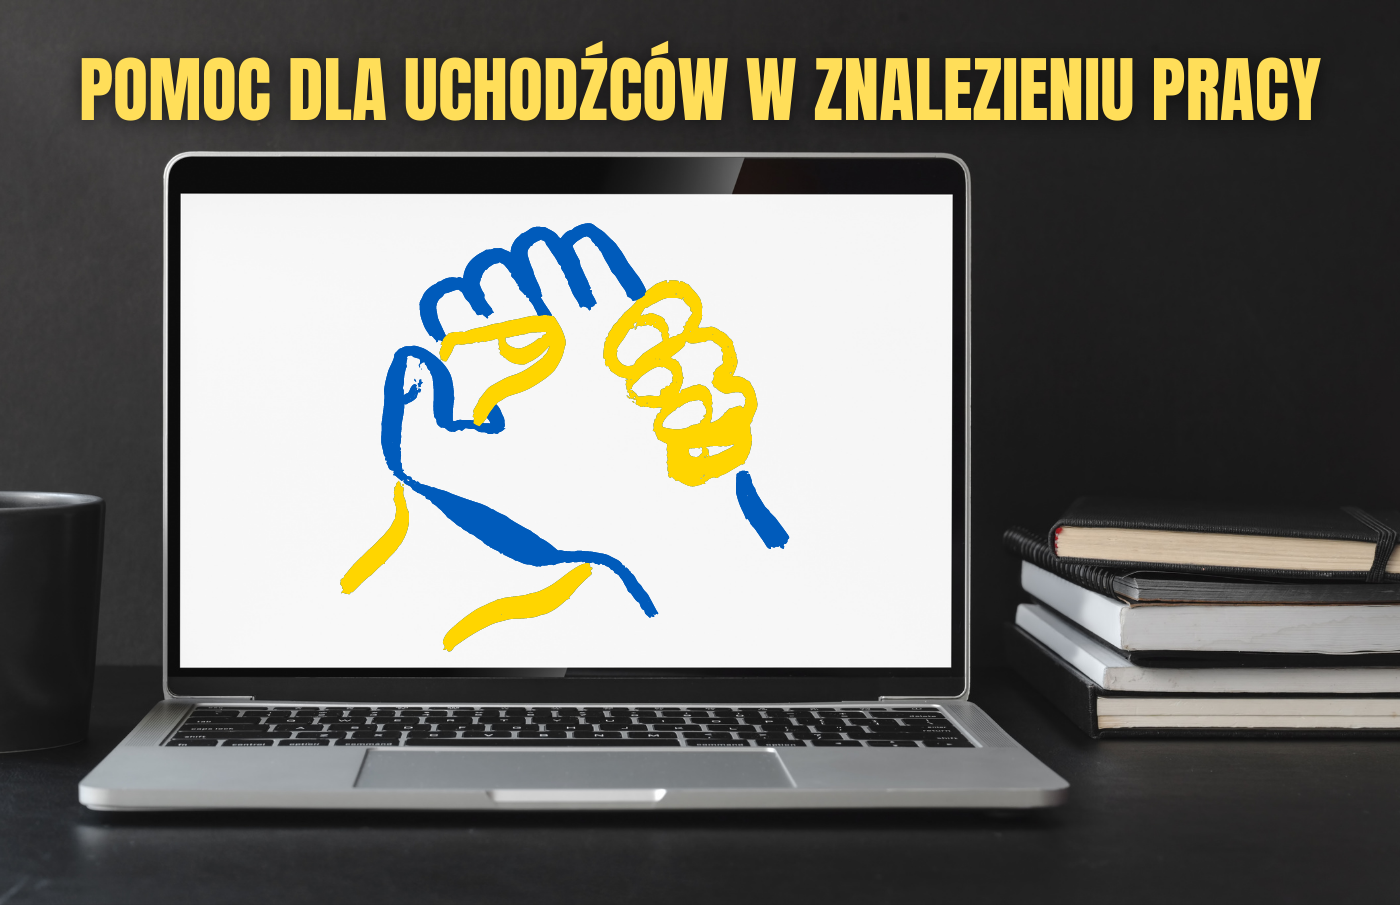 Information for ukrainian citizens about taking up work in Poland